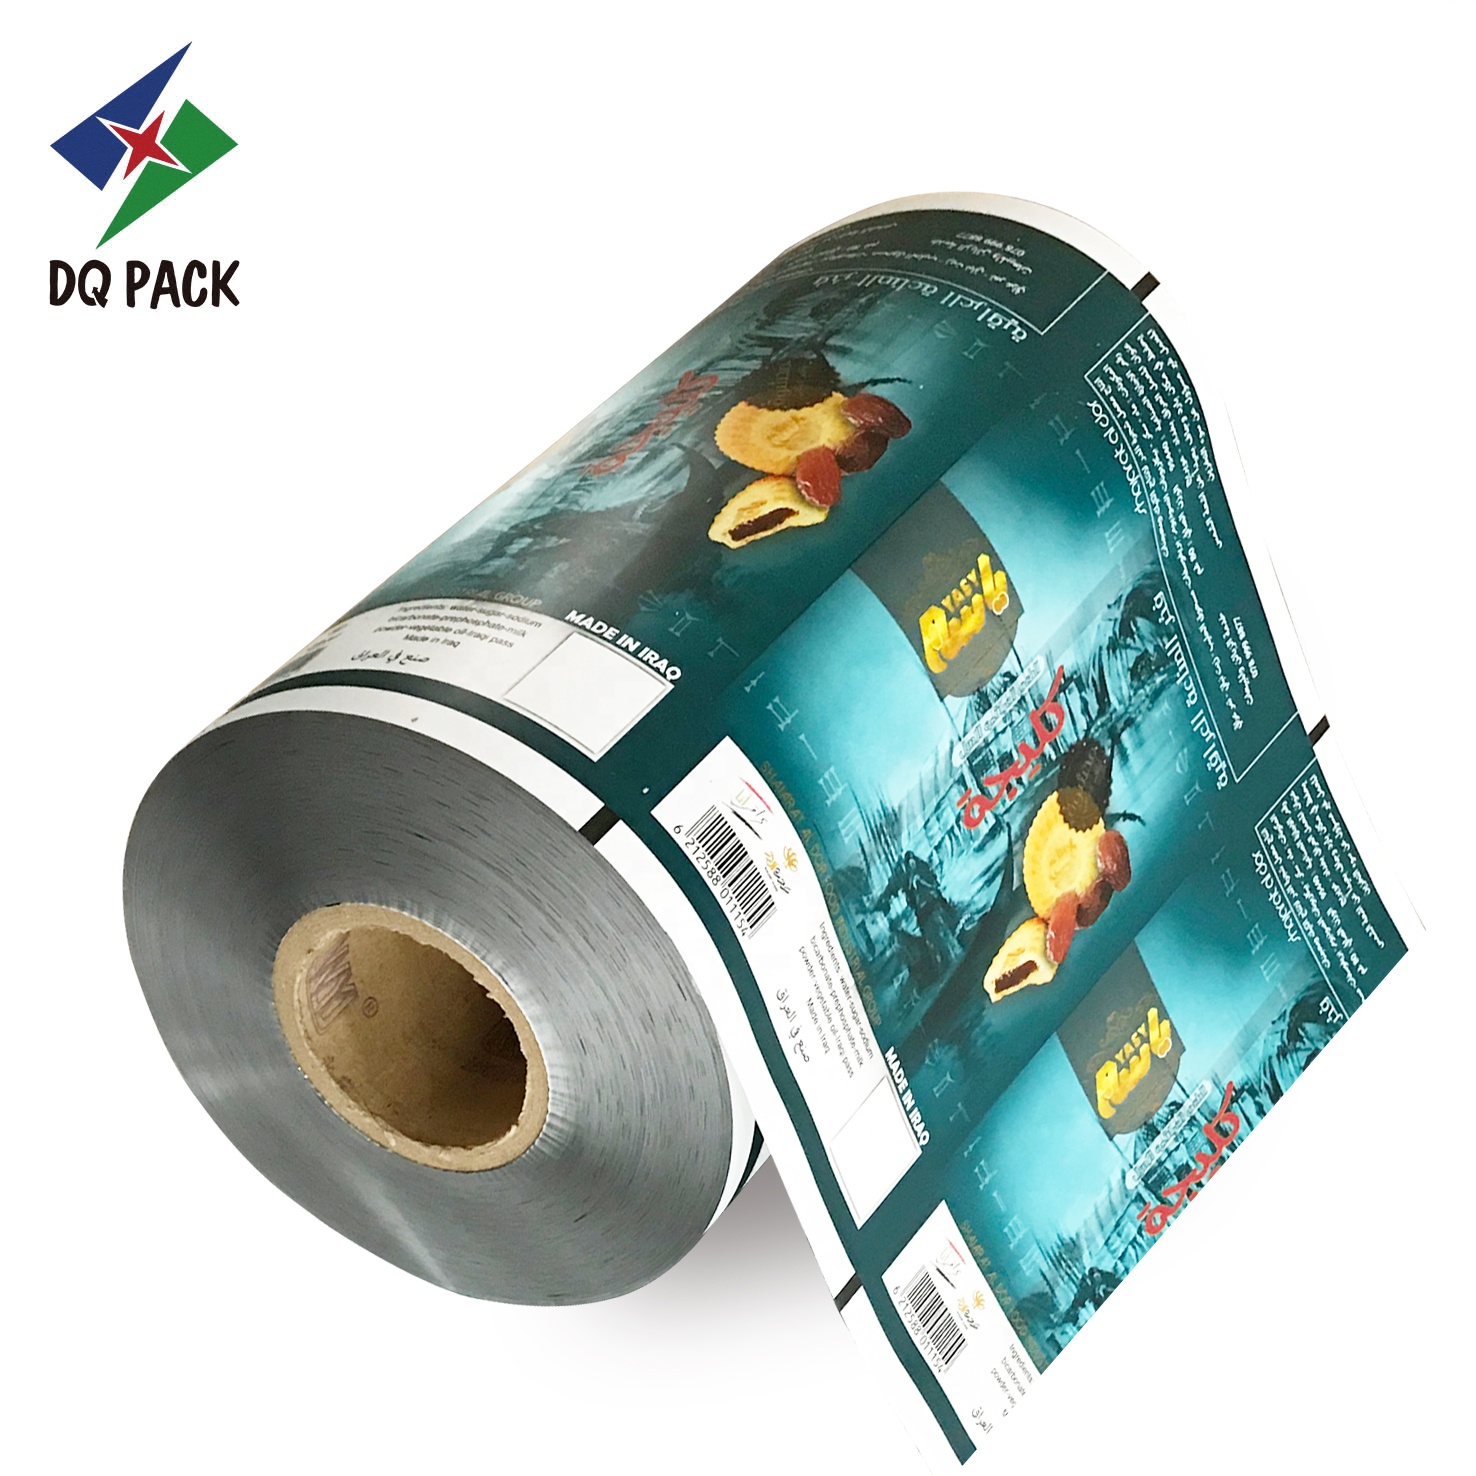 DQ PACK Colorful Custom Gravure Printing Metalized OPP Roll Film For Food Ice cream pop Packaging